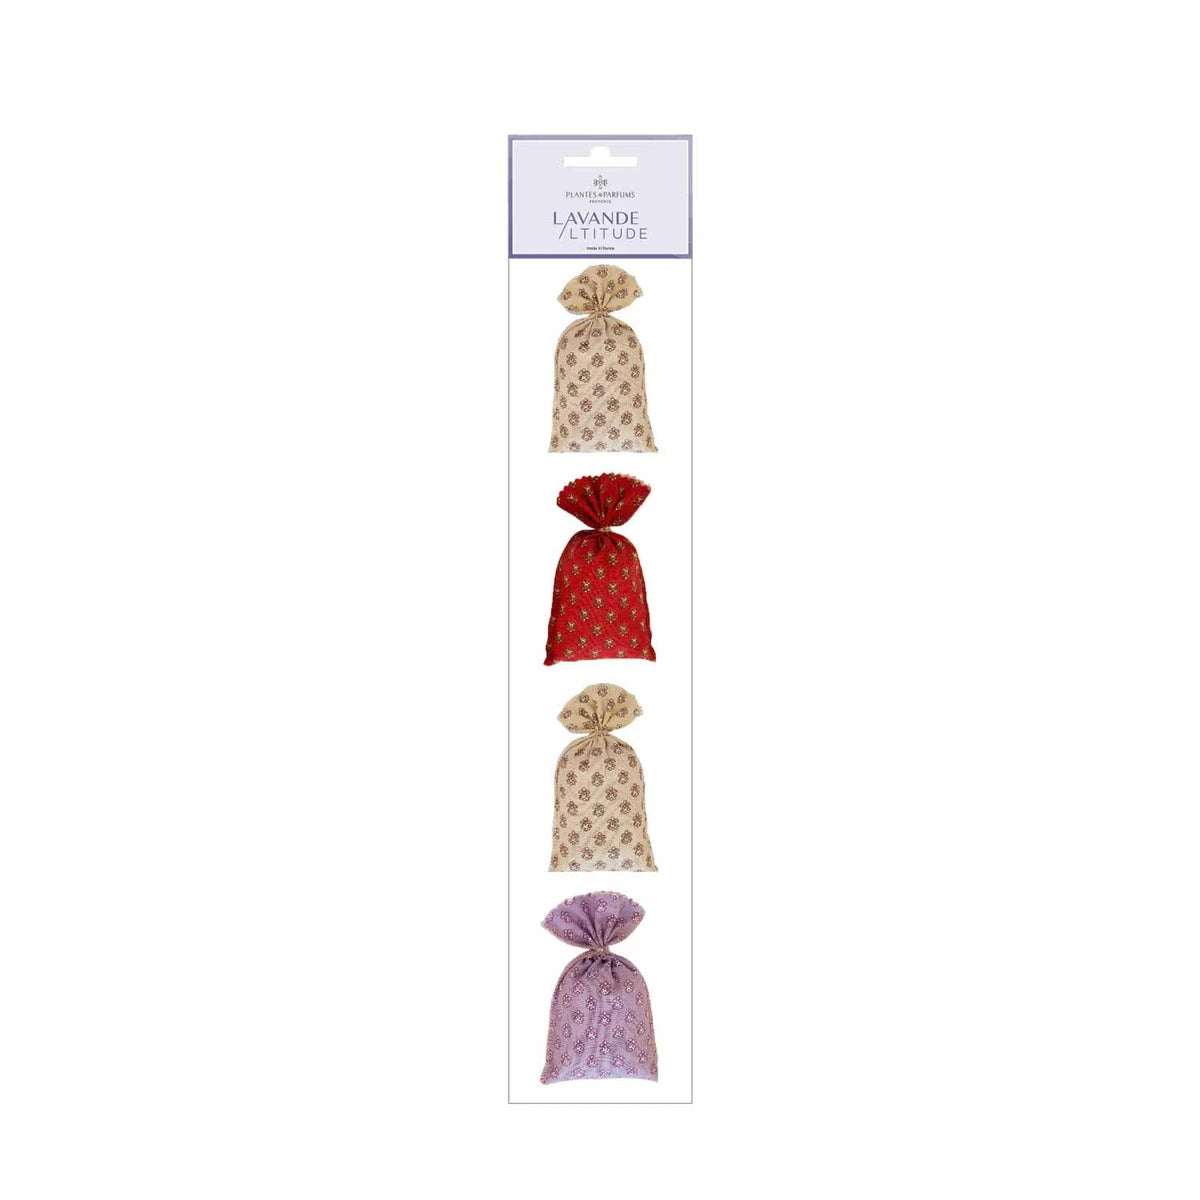 Packaging of La Lavande bath bombs with five different colored bombs displayed vertically, including beige and red. The background is simple and white, emphasizing the product. La Lavande Strip of Lavender Sachets - Classic French Fabric accompany.